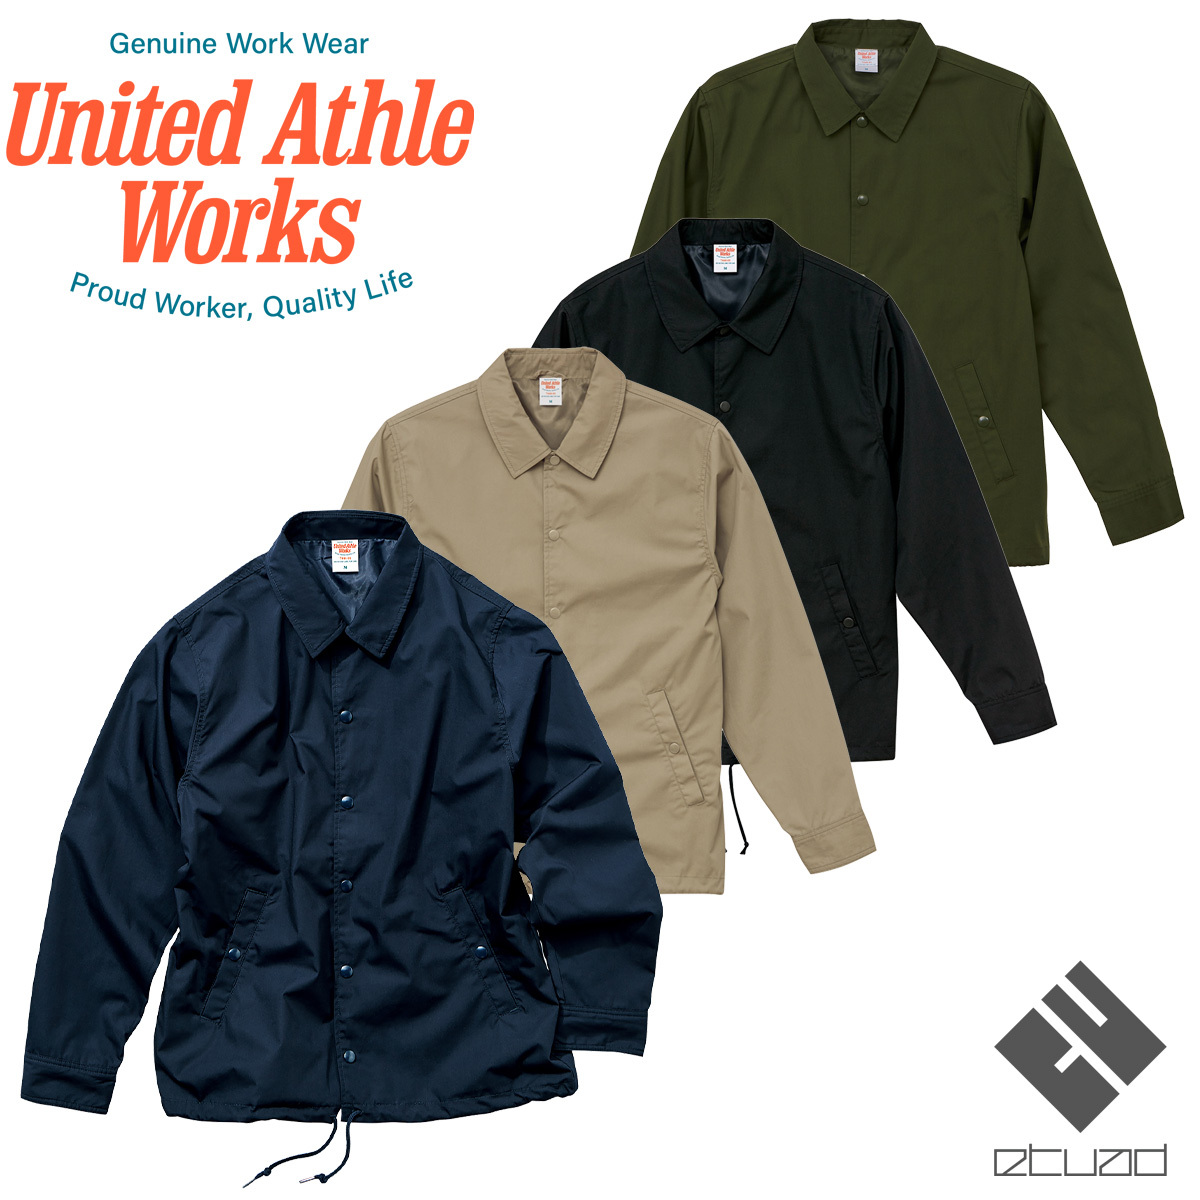 United Athle Works united a attrition Works T/C coach jacket ( lining attaching ) 7448-01 XS~XL